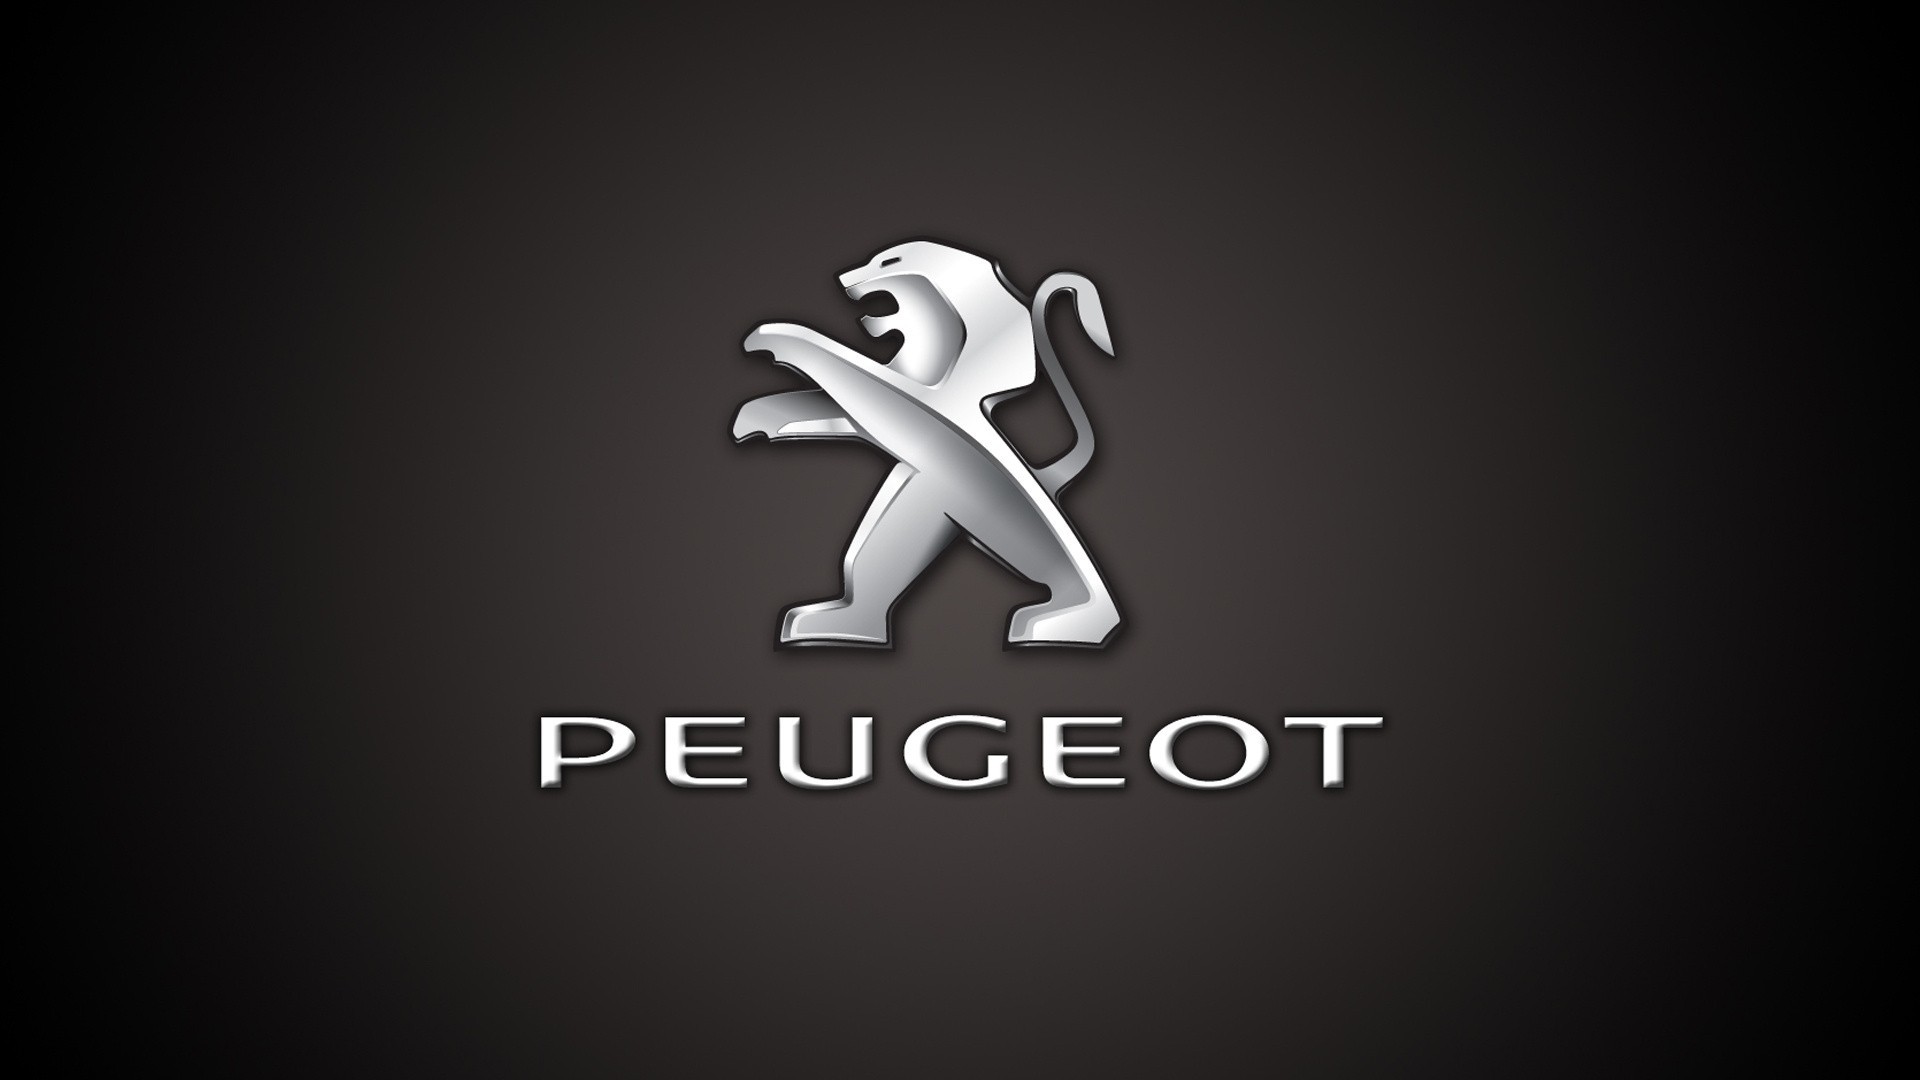 1920x1080 Peugeot Steel Lion Logo Wallpaper HD, we love cars which is why you will  find a huge collection of free cars wallpapers in HD.